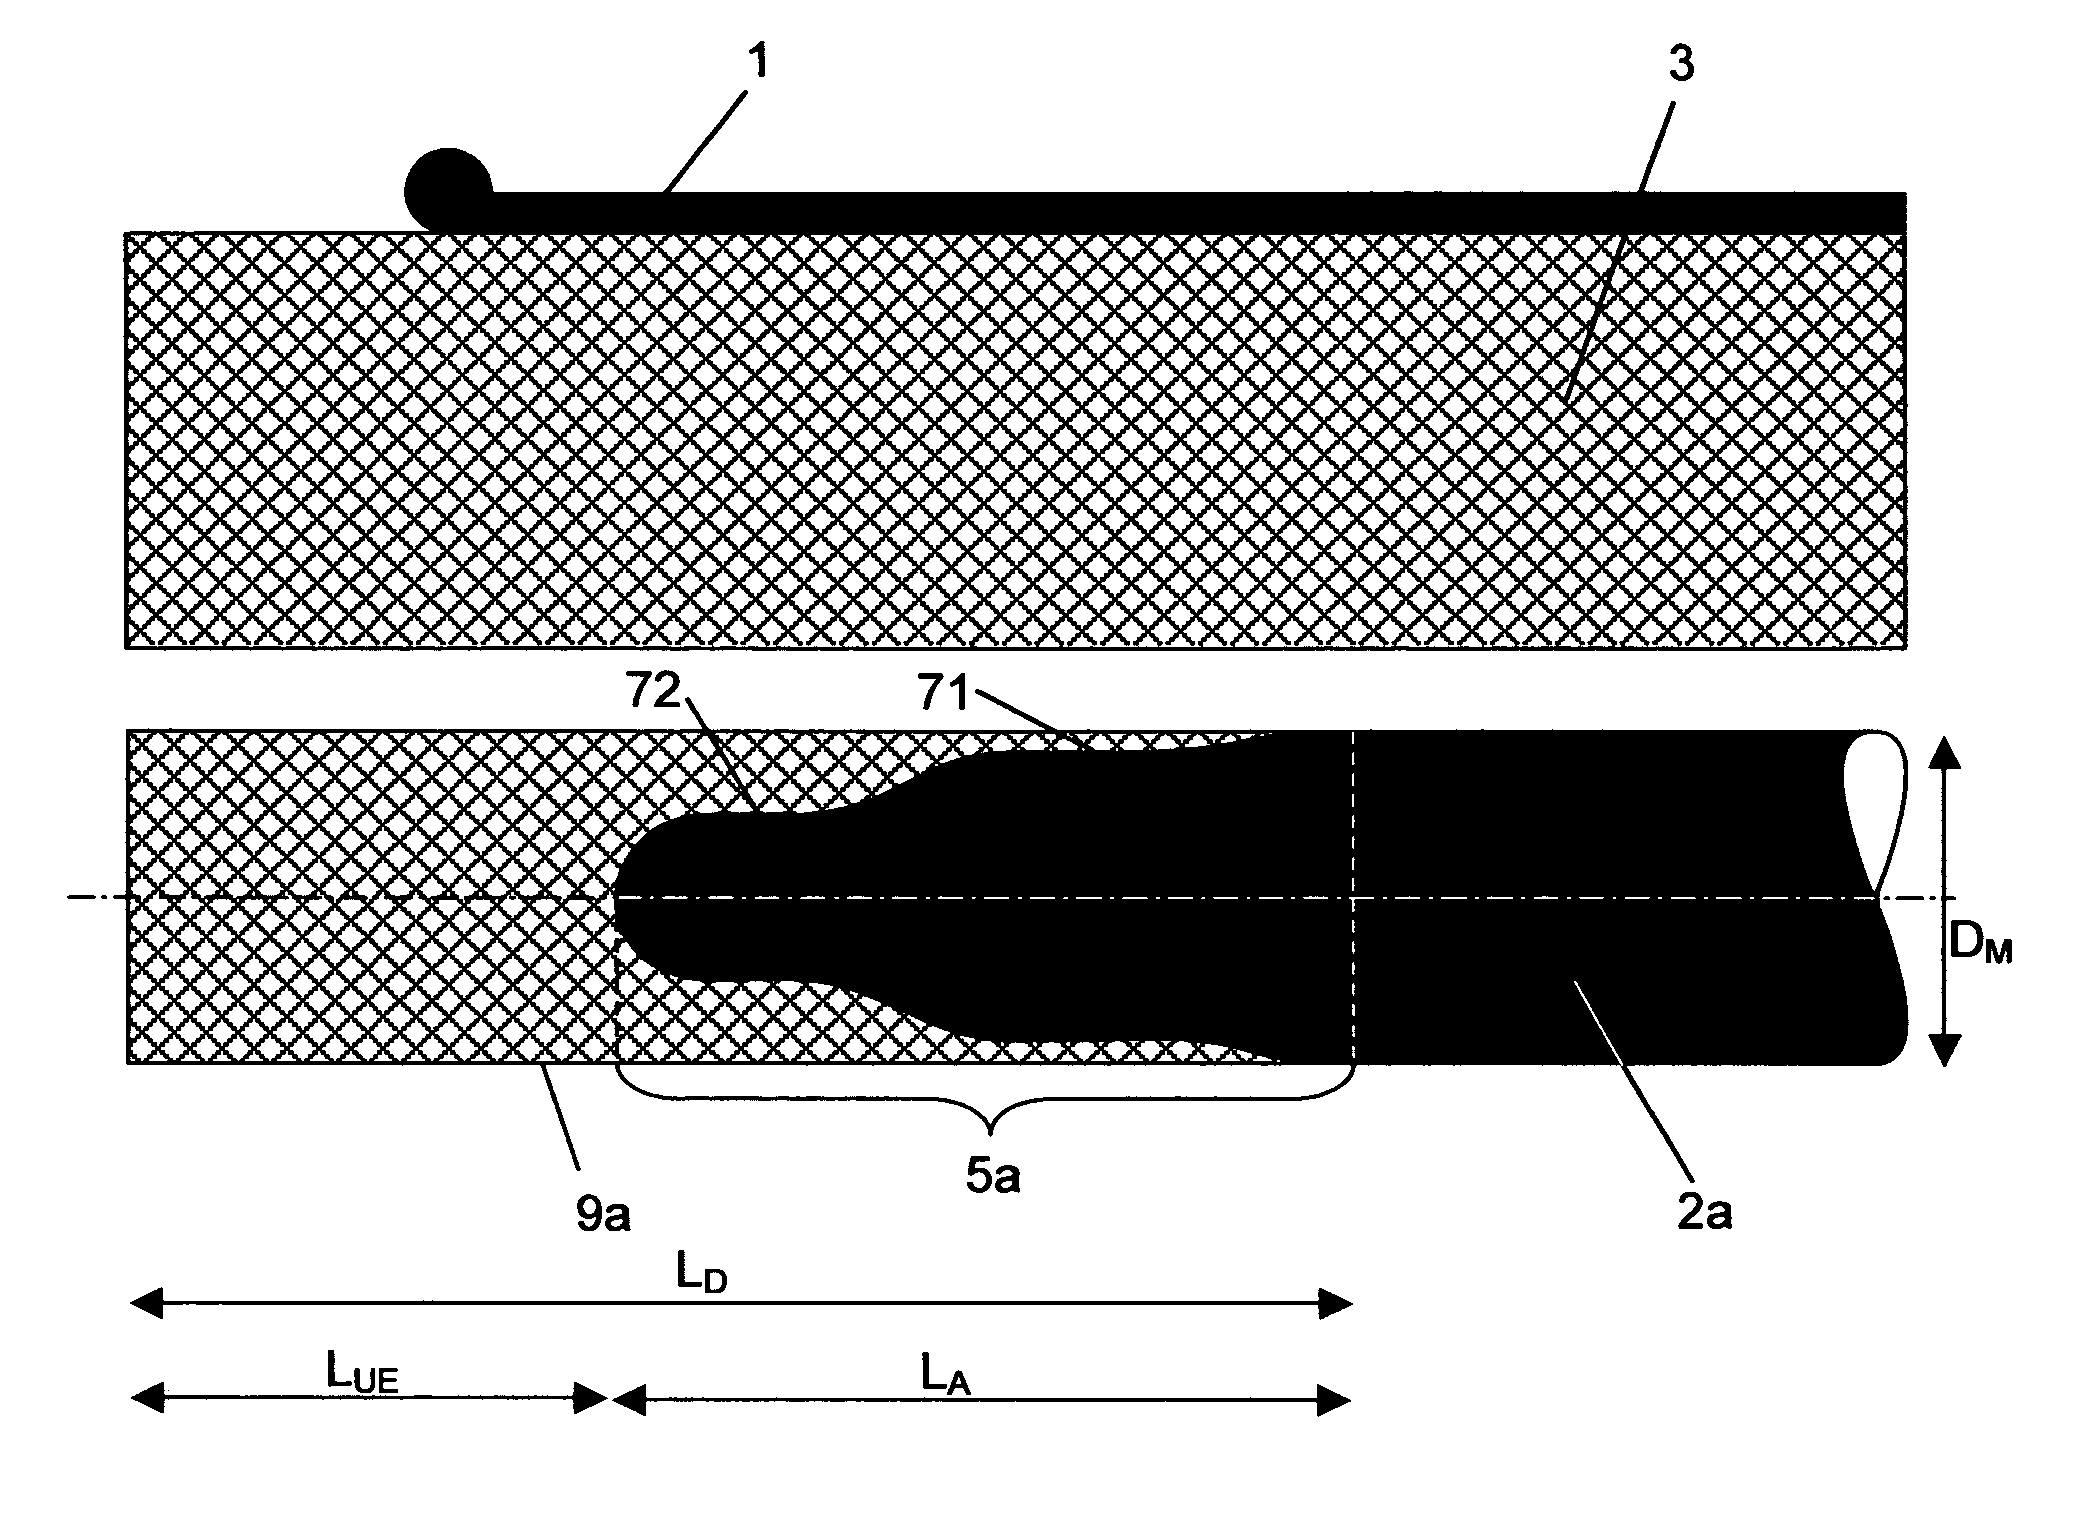 Tubular capacitor with variable capacitance and dielectrically elongated inner electrode for NMR applications